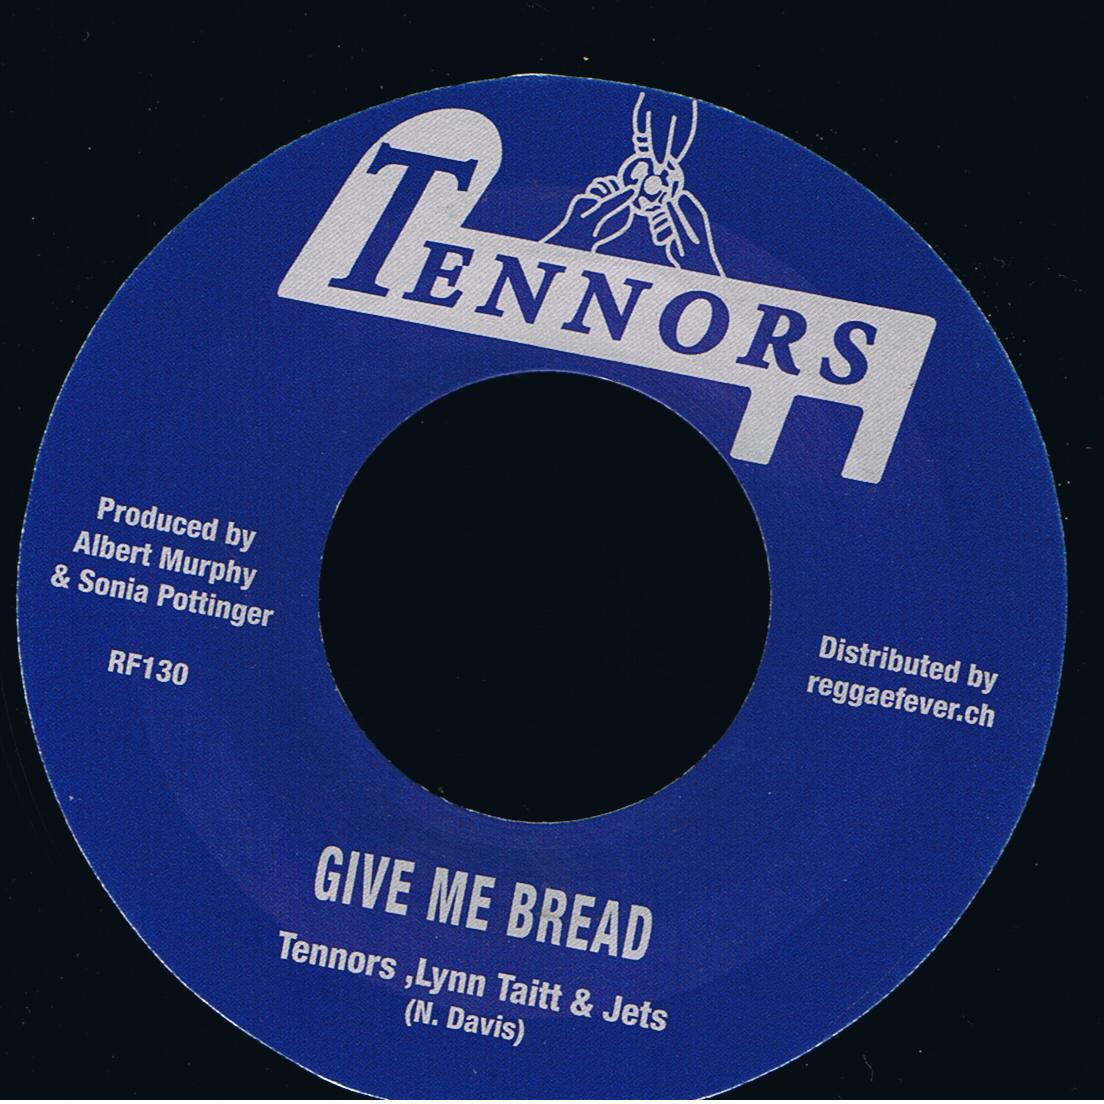 The Tennors, Lynn Taitt & The Jets - Give Me Bread / The Tennors, Lynn Taitt & The Jets - Gee Whiz (7")